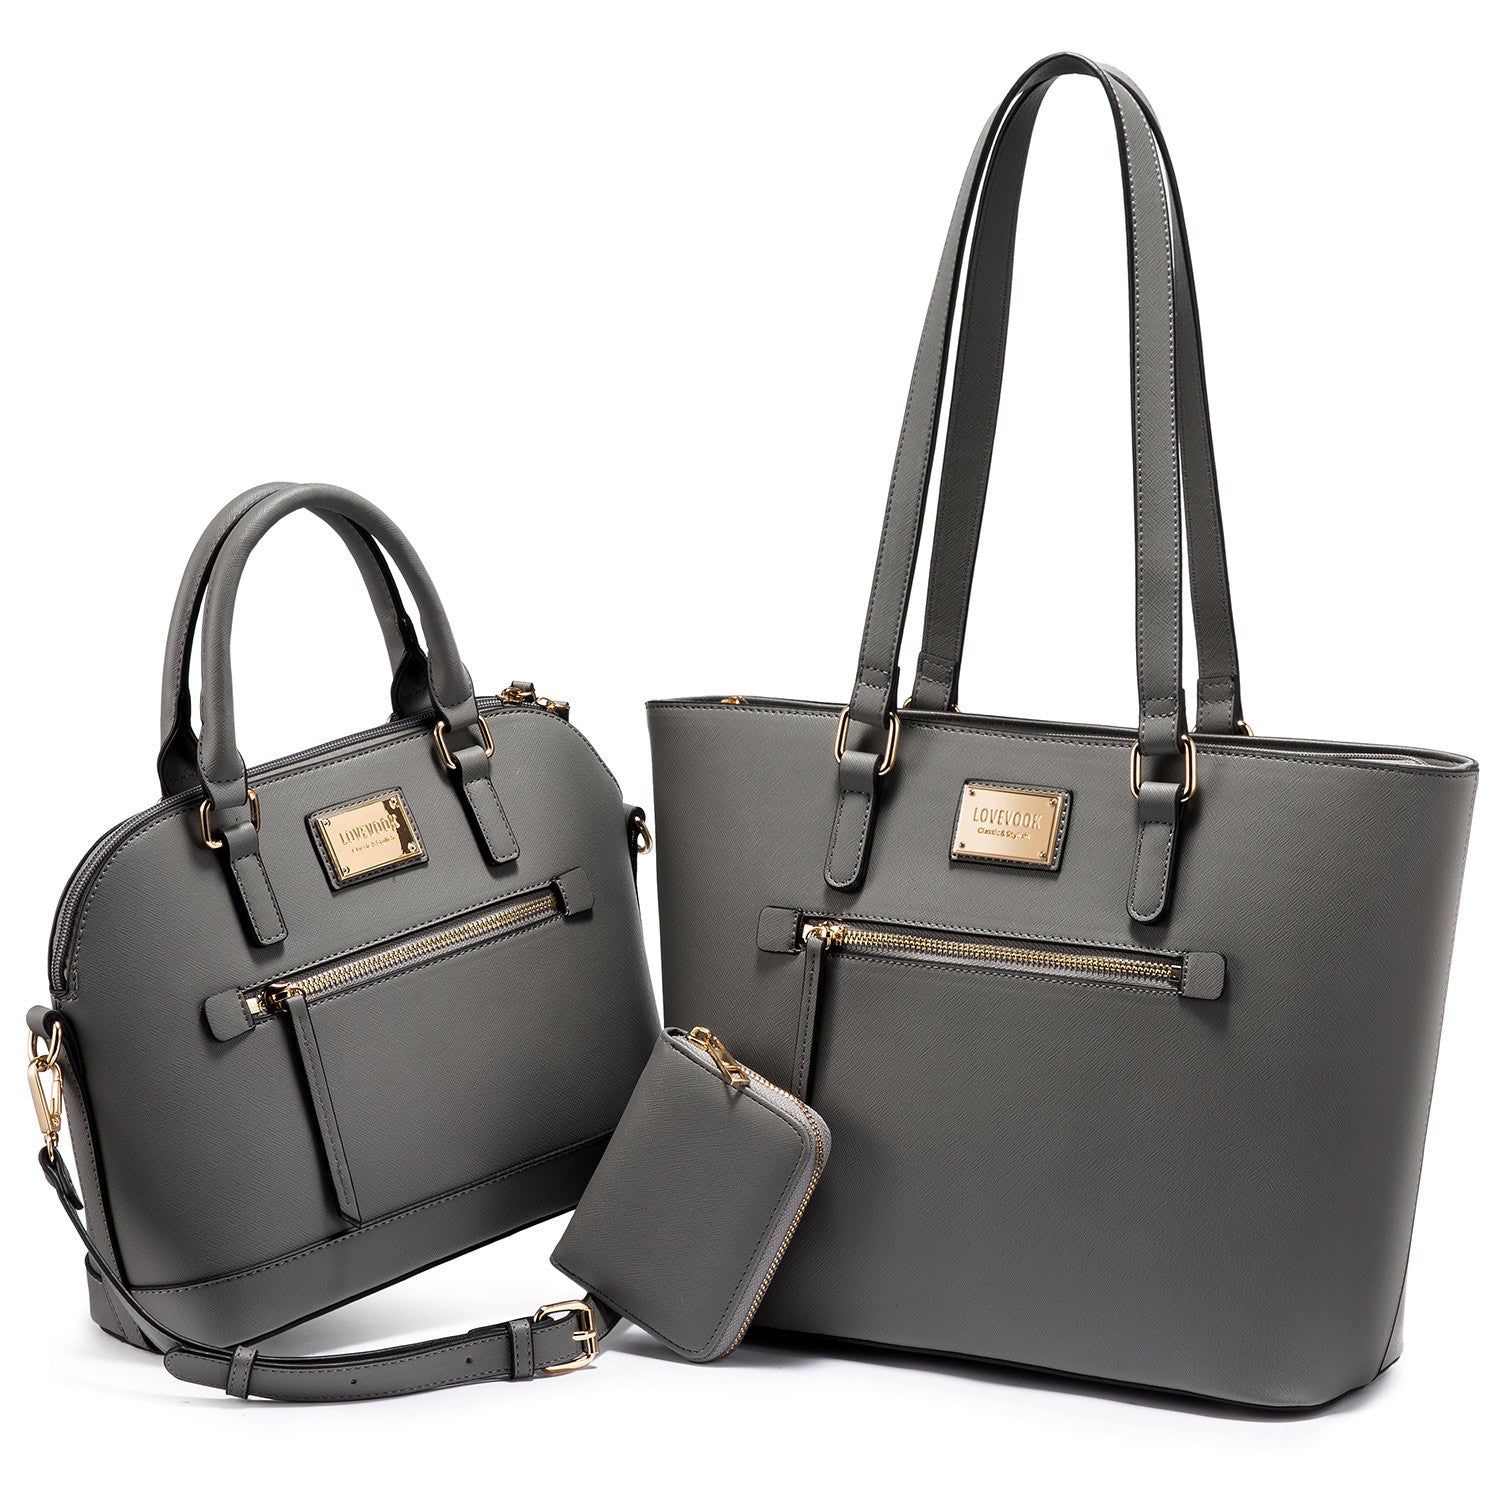 The Lovevook Handbag Set is stylish, functional — and on sale